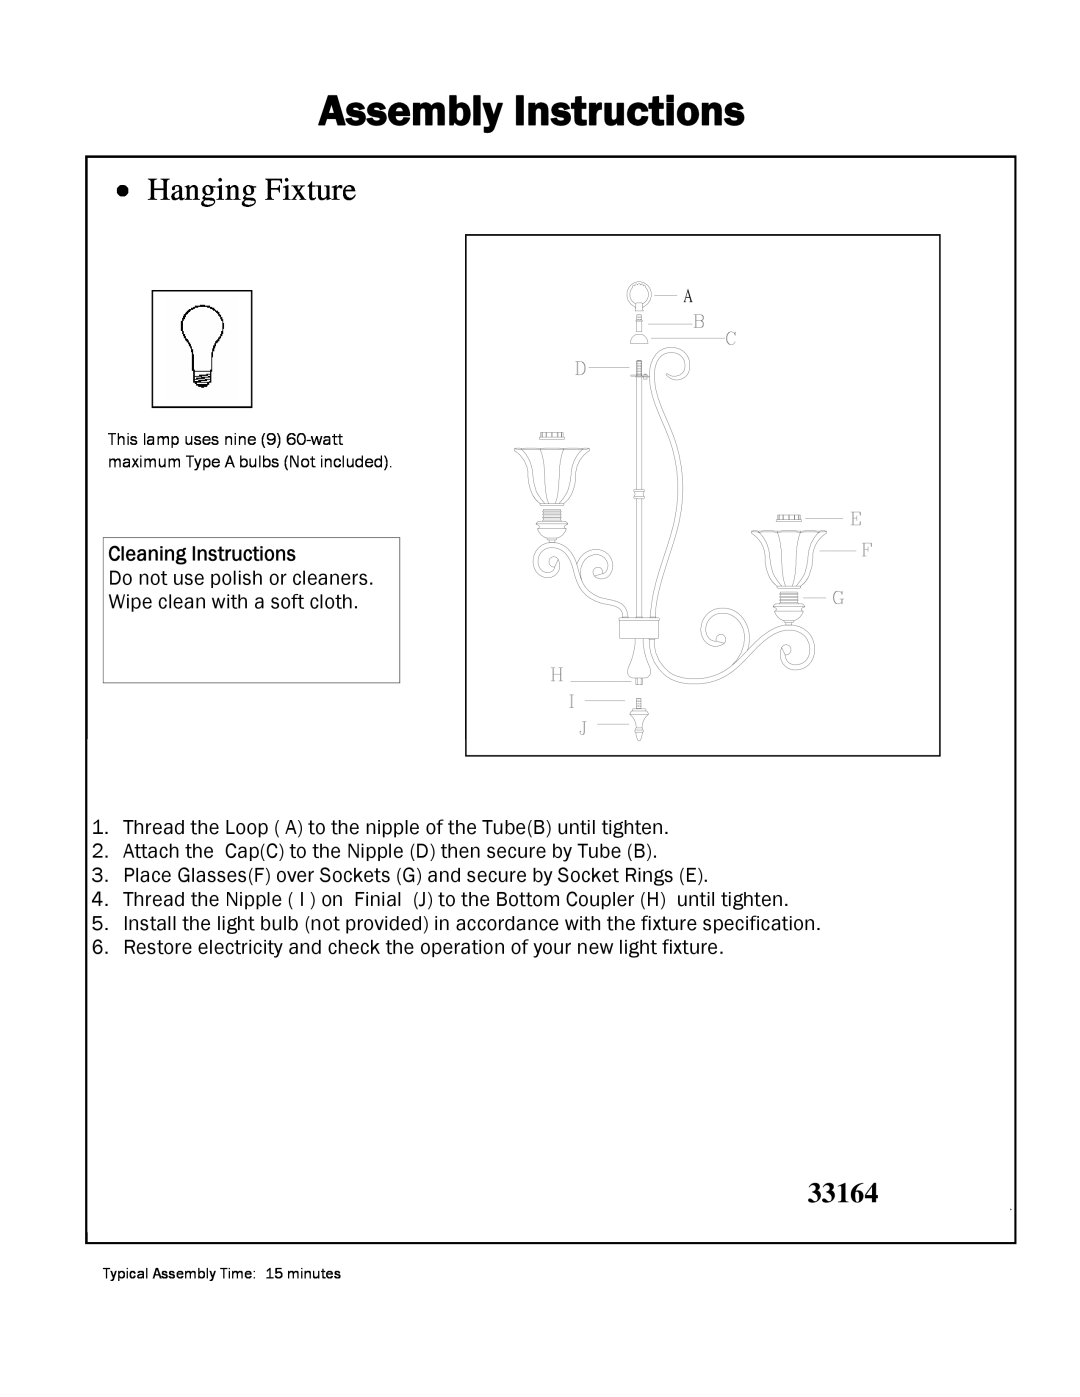 Triarch 33164 manual Assembly Instructions, Hanging Fixture, Cleaning Instructions 